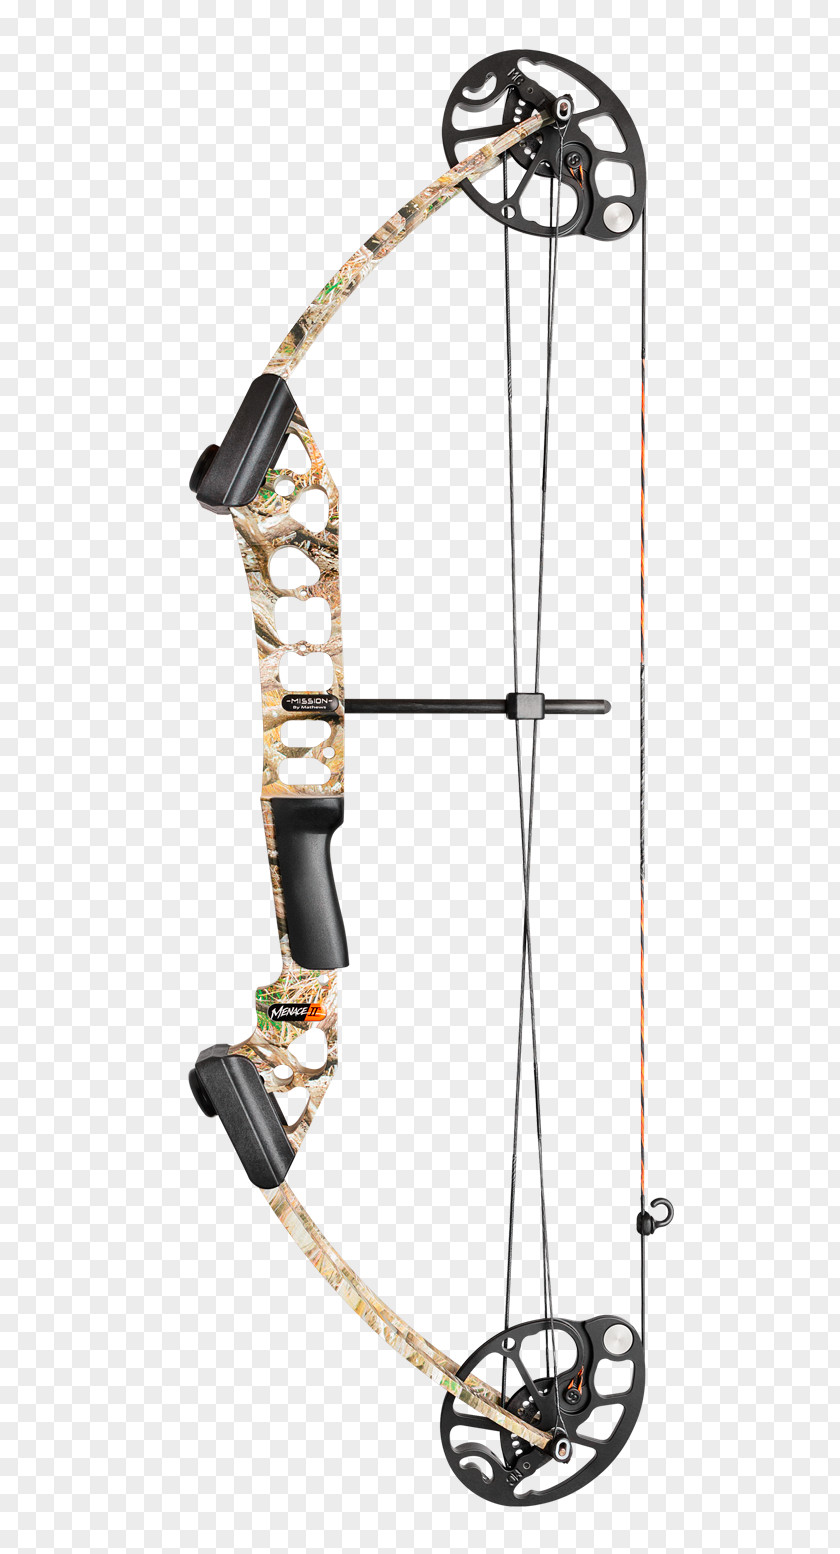 Archery Compound Bows Bow And Arrow Bowhunting Stabiliser PNG